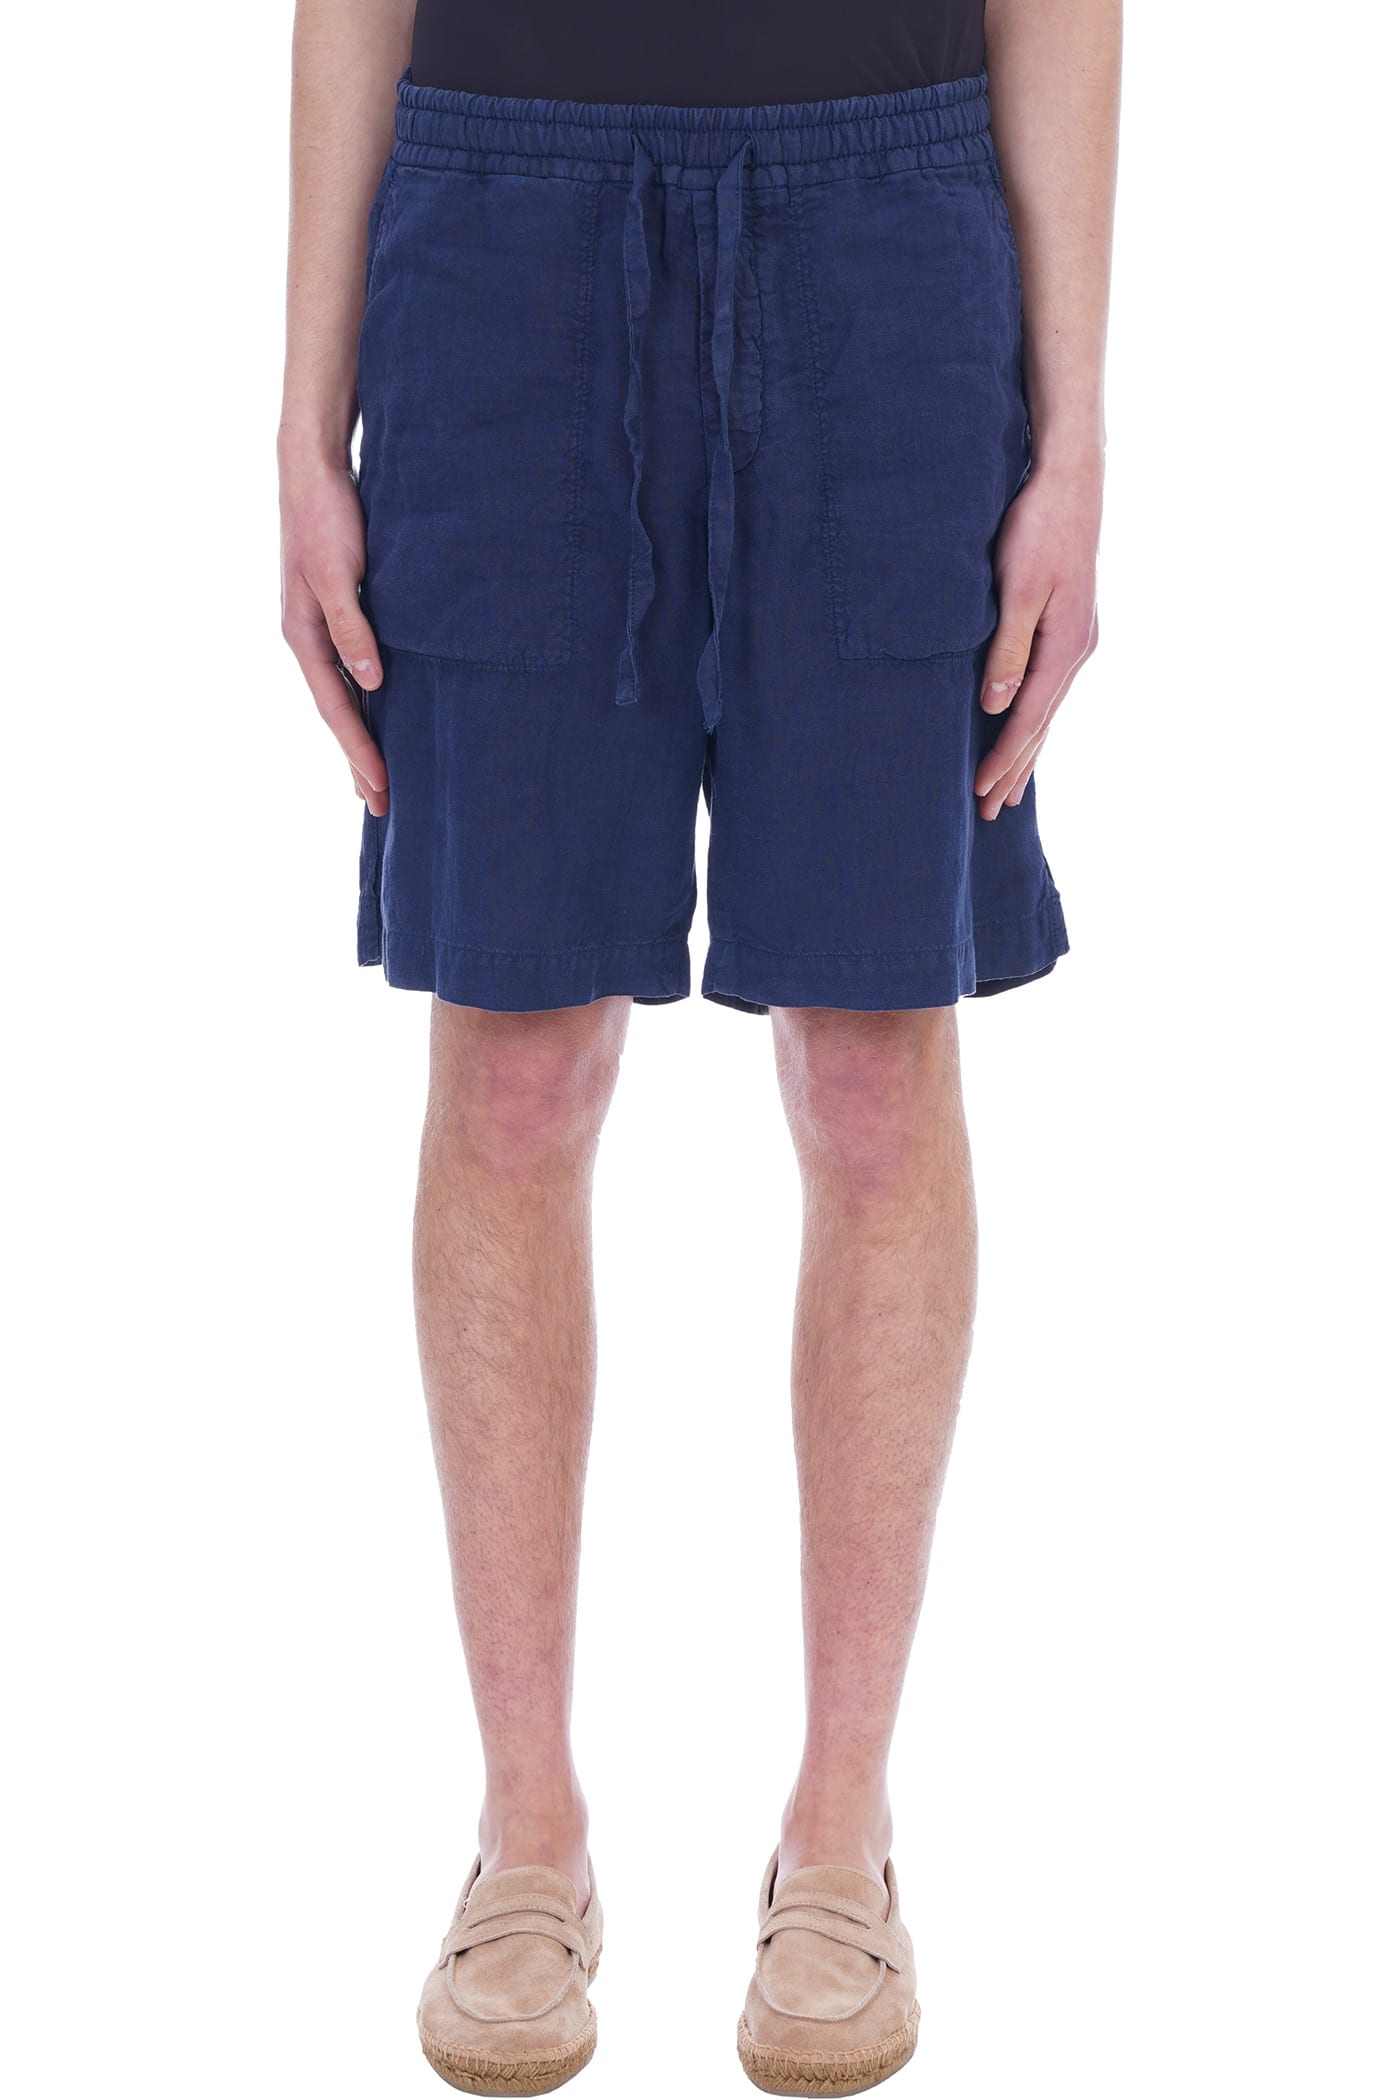 Z Zegna Shorts In Blue Cotton